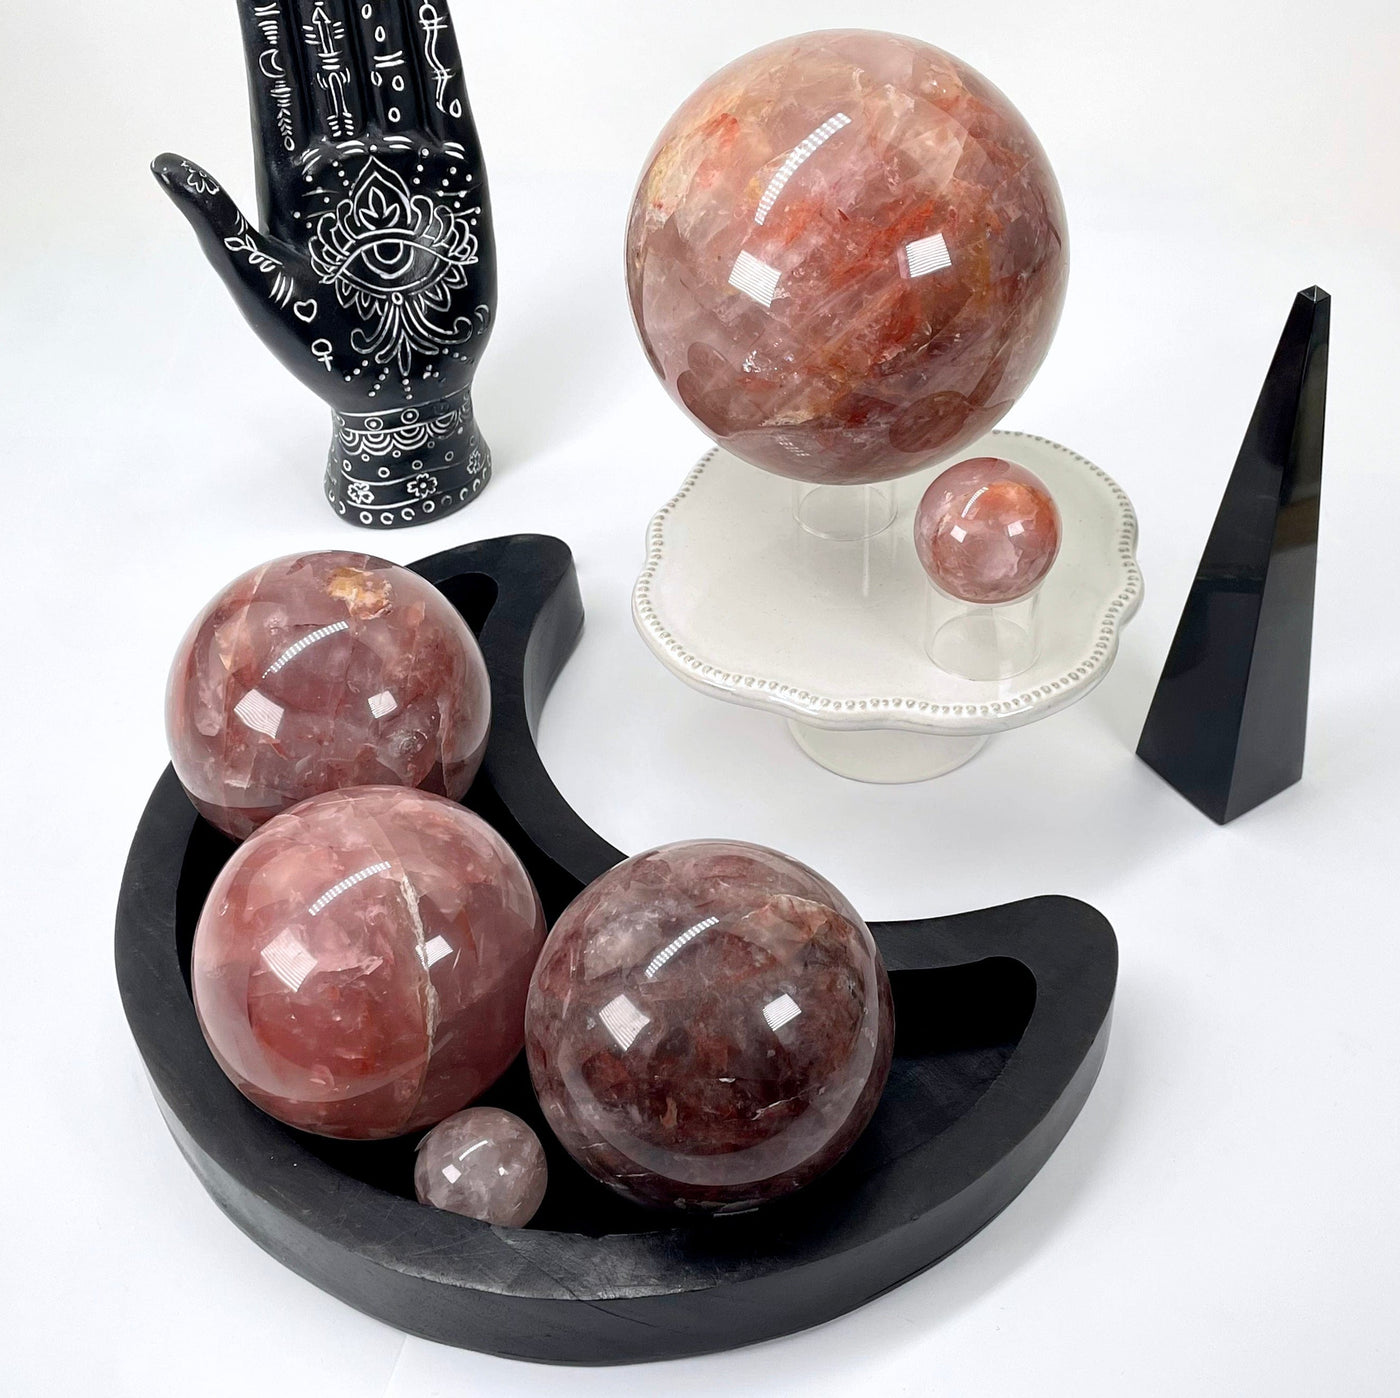 many different guava polished sphere weights on display for possible variations